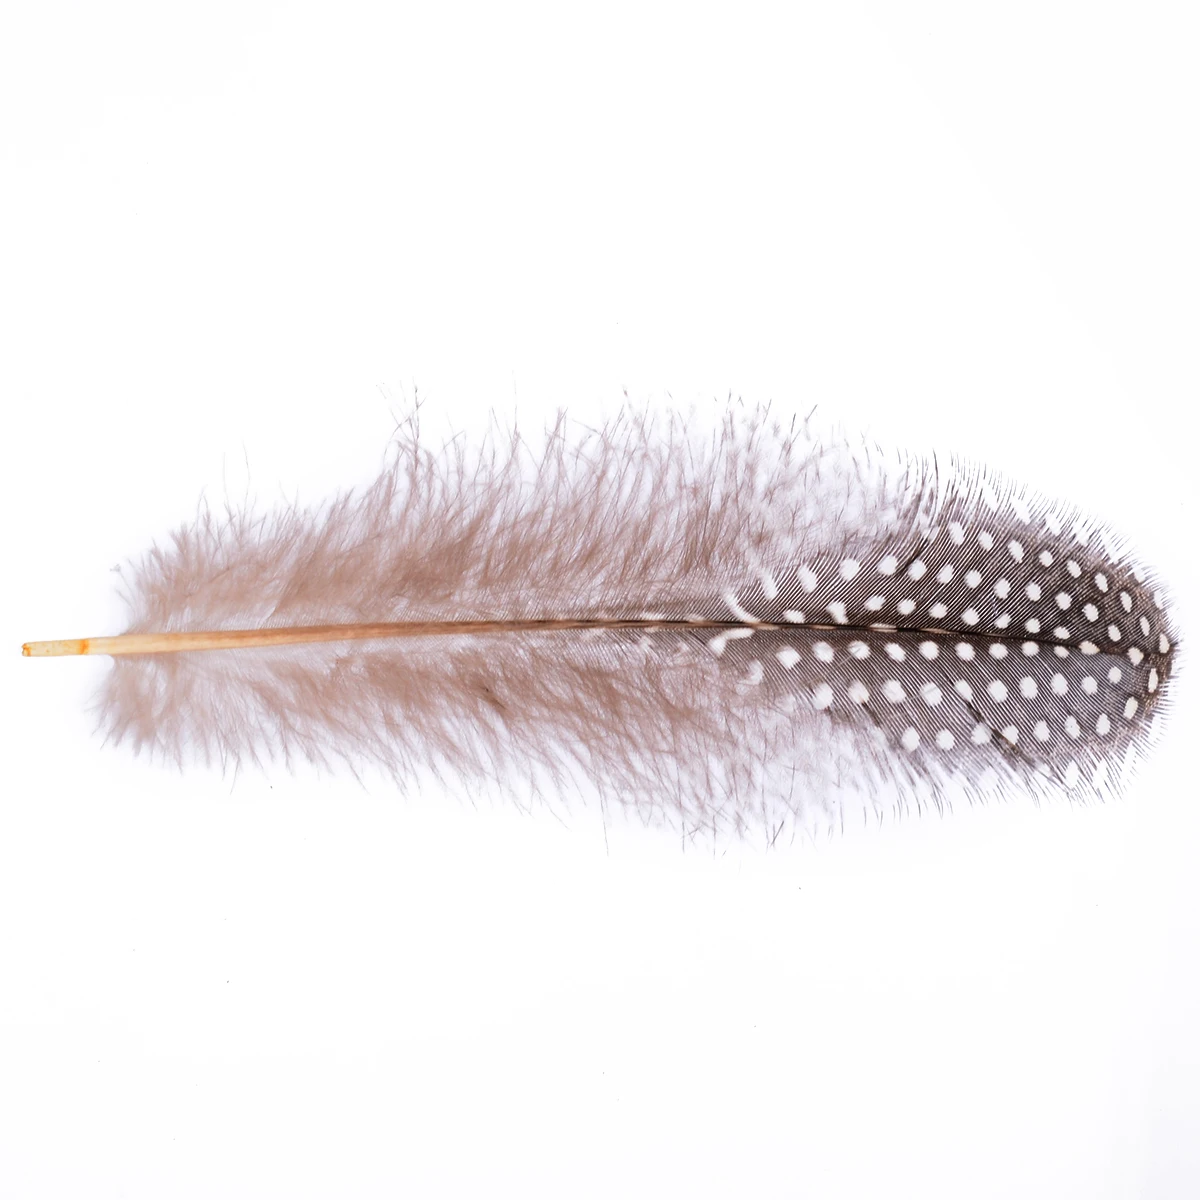 50pcs Spotted Guinea Fowl Plumage Feathers Millinery 4.5-10cm For Crafts DIY Bags Clothes Decorations